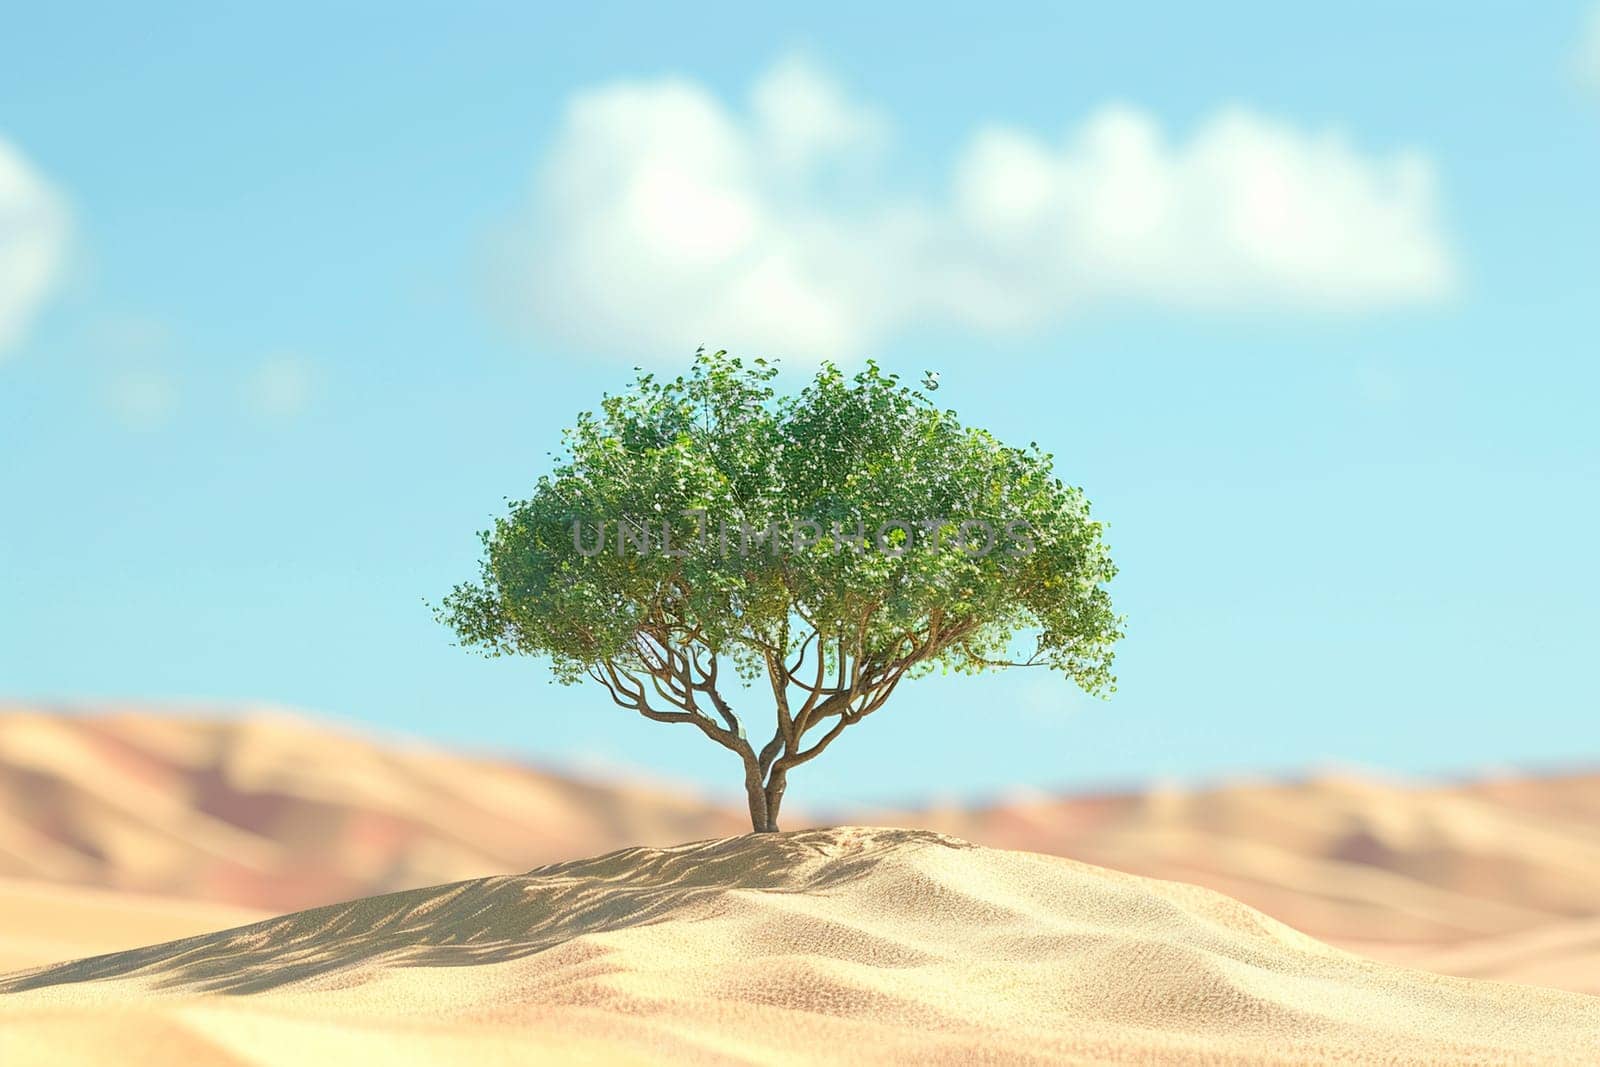 Green tree stands alone in desert landscape, vividly representing reforestation, environmental recovery, sustainability and resilience